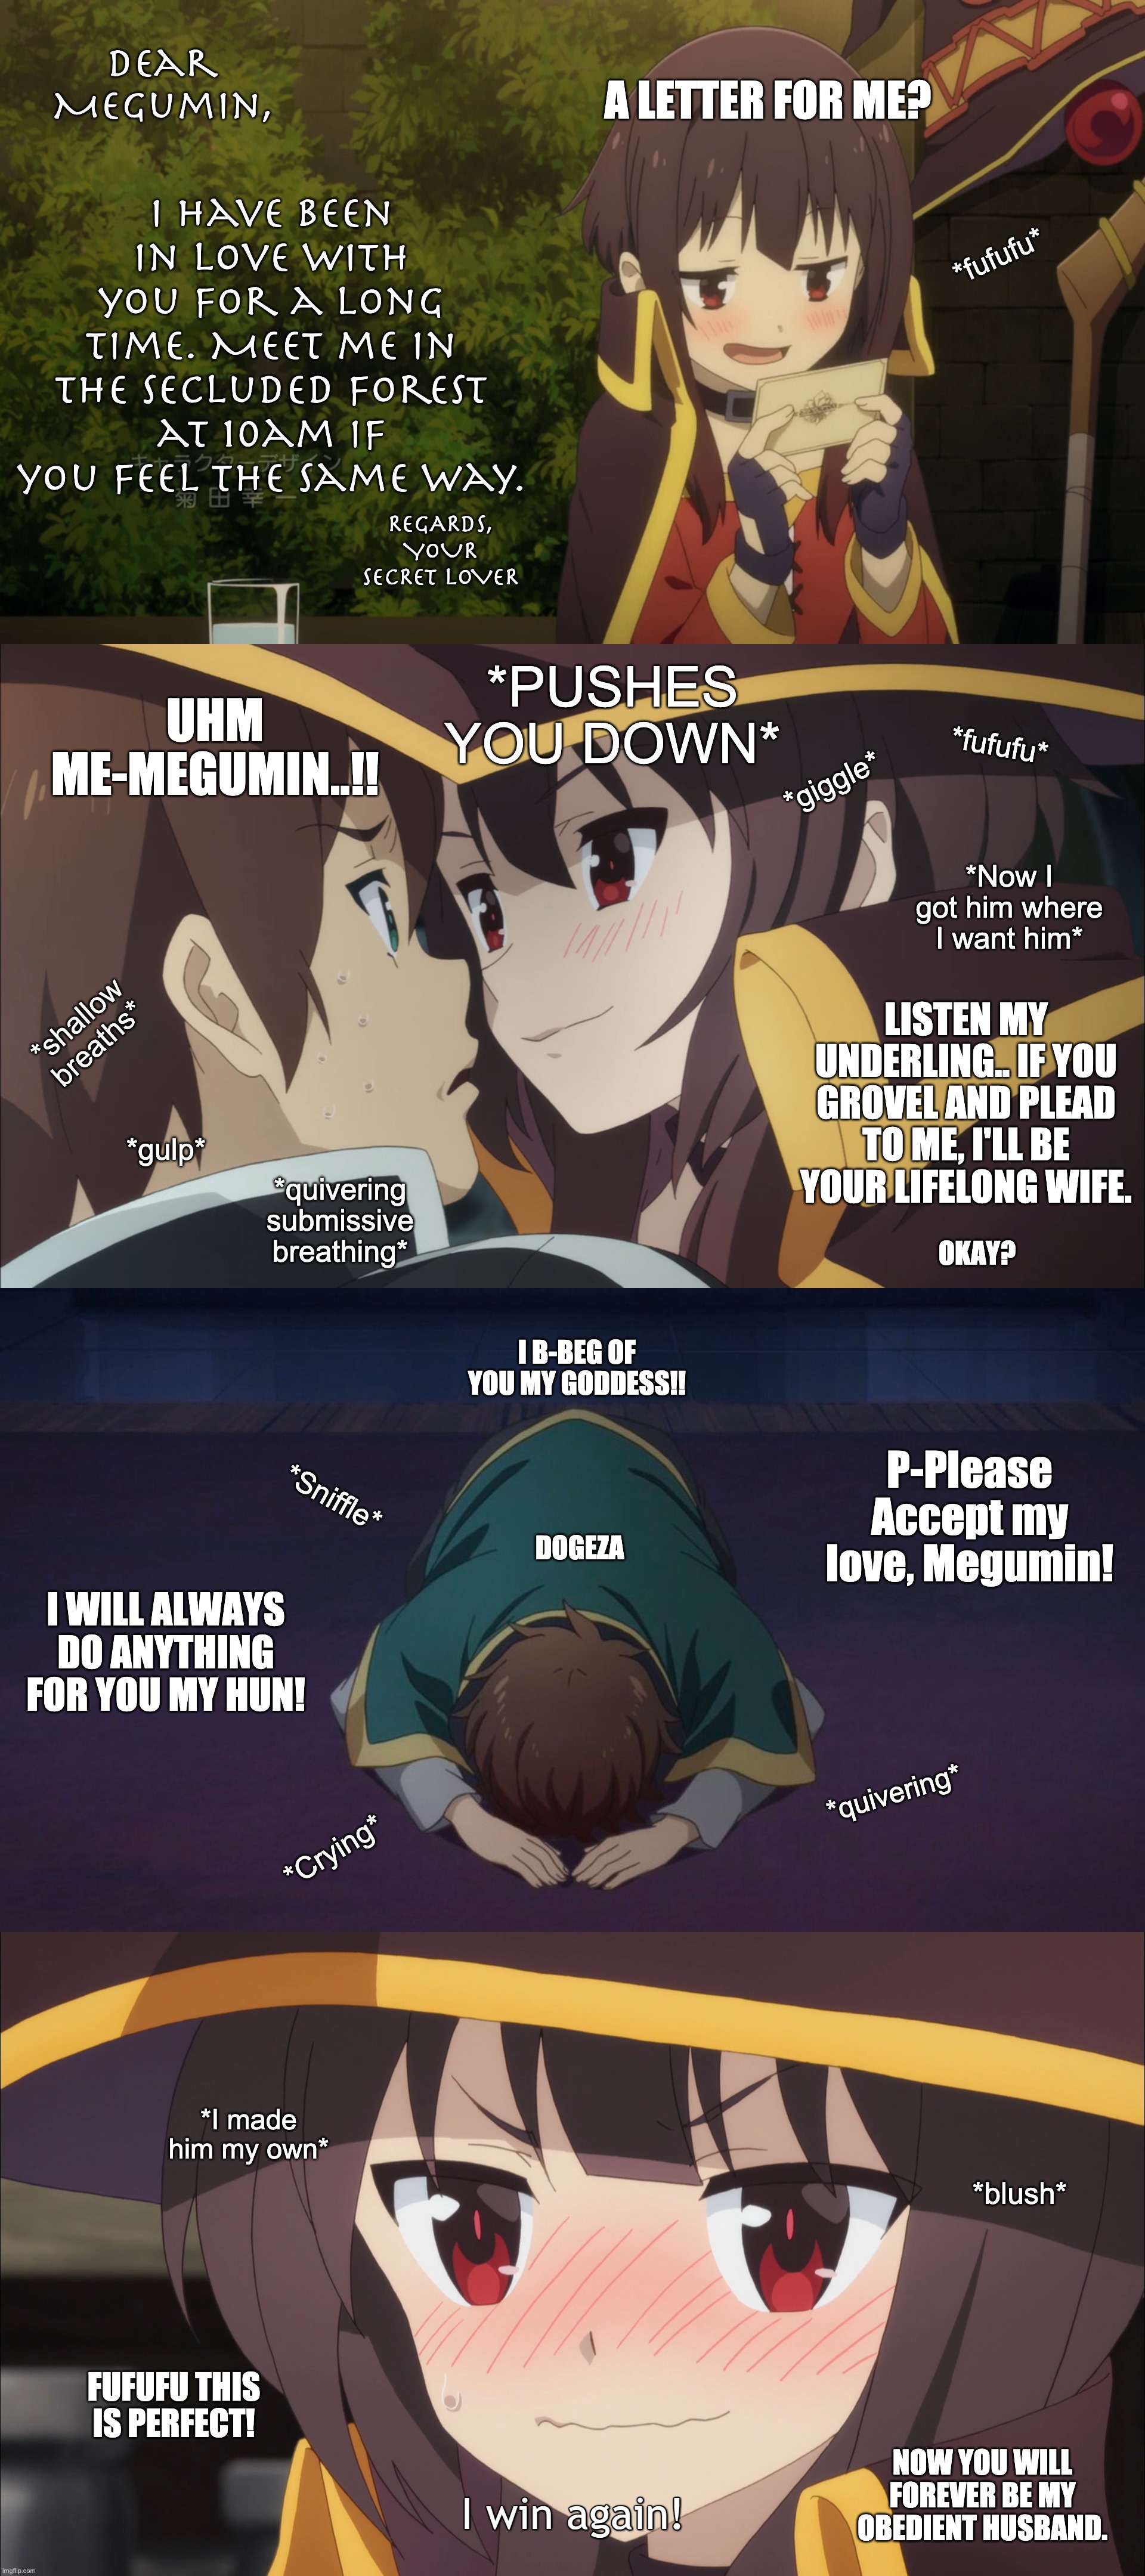 Manga me a love story! | Dear Megumin, I have been in love with you for a long time. Meet me in the secluded forest at 10am if you feel the same way. A LETTER FOR ME? *fufufu*; REGARDS,
YOUR SECRET LOVER; *PUSHES YOU DOWN*; UHM ME-MEGUMIN..!! *fufufu*; *giggle*; *Now I got him where I want him*; LISTEN MY UNDERLING.. IF YOU GROVEL AND PLEAD TO ME, I'LL BE YOUR LIFELONG WIFE. *shallow breaths*; *gulp*; *quivering submissive breathing*; OKAY? I B-BEG OF YOU MY GODDESS!! P-Please Accept my love, Megumin! *Sniffle*; DOGEZA; I WILL ALWAYS DO ANYTHING FOR YOU MY HUN! *quivering*; *Crying*; *I made him my own*; *blush*; FUFUFU THIS IS PERFECT! NOW YOU WILL FOREVER BE MY OBEDIENT HUSBAND. | image tagged in megumin,anime,funny,manga,love,memes | made w/ Imgflip meme maker